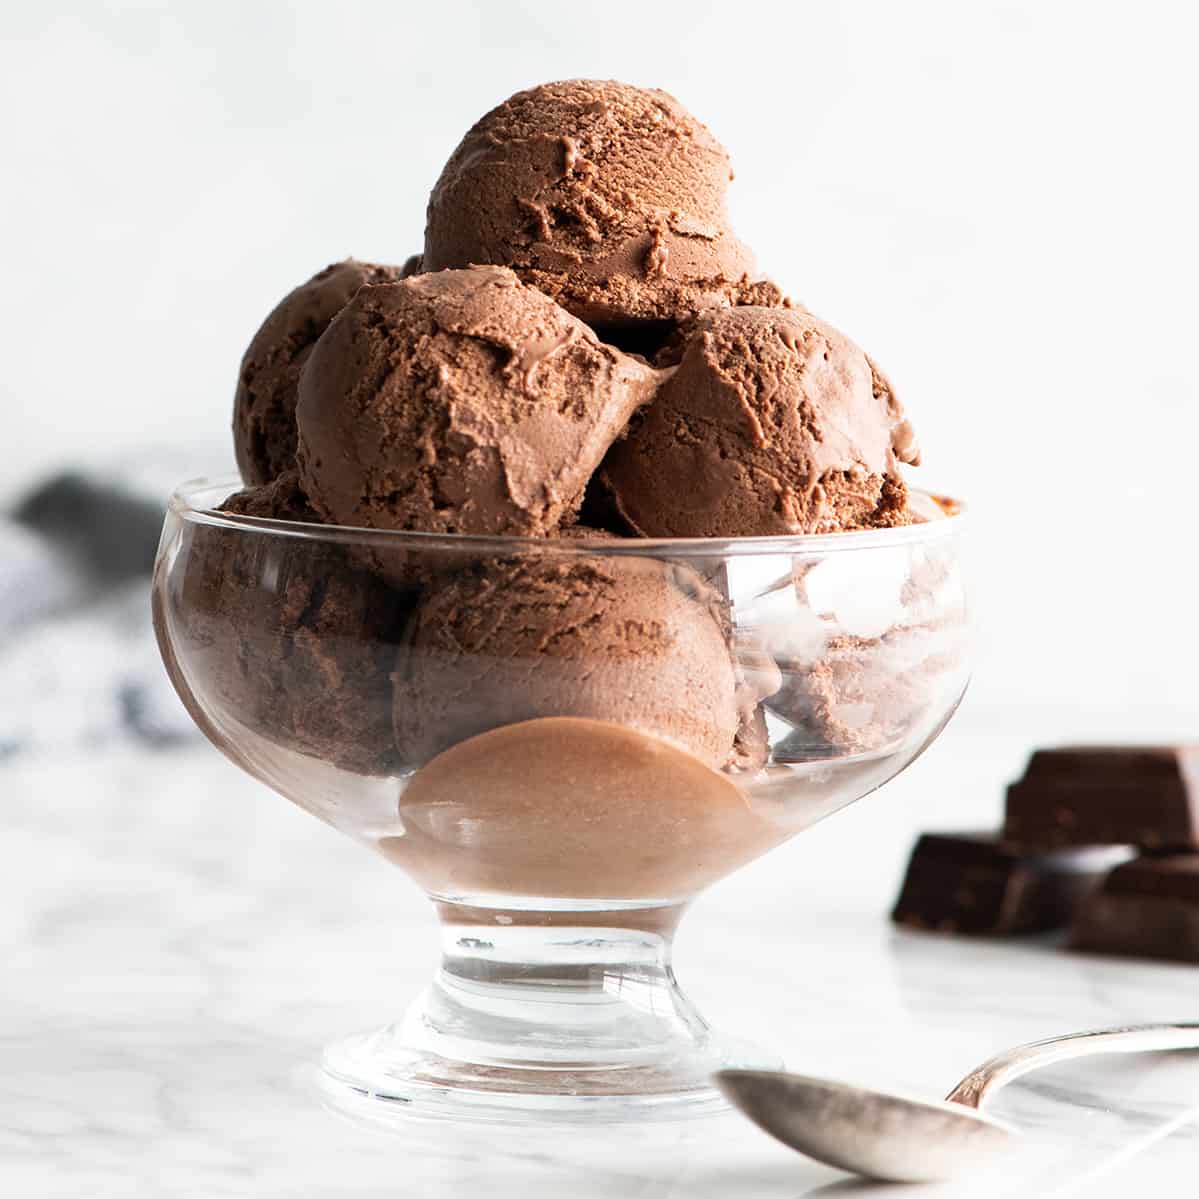 Front view of a bowl of chocolate ice cream